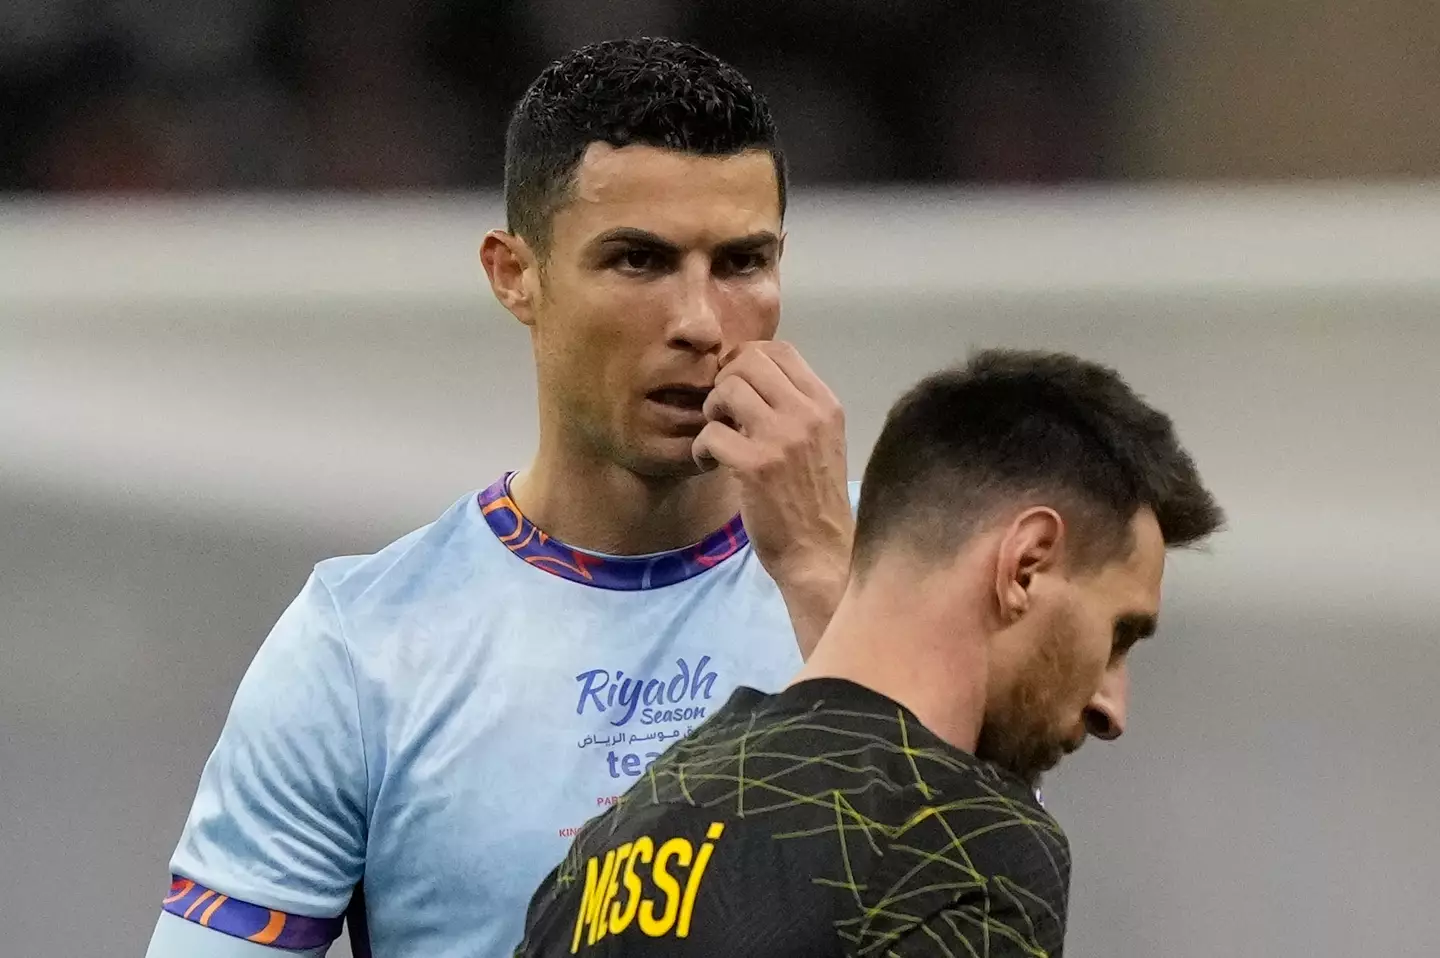 Cristiano Ronaldo and his old foe Lionel Messi were reunited on Wednesday evening. (